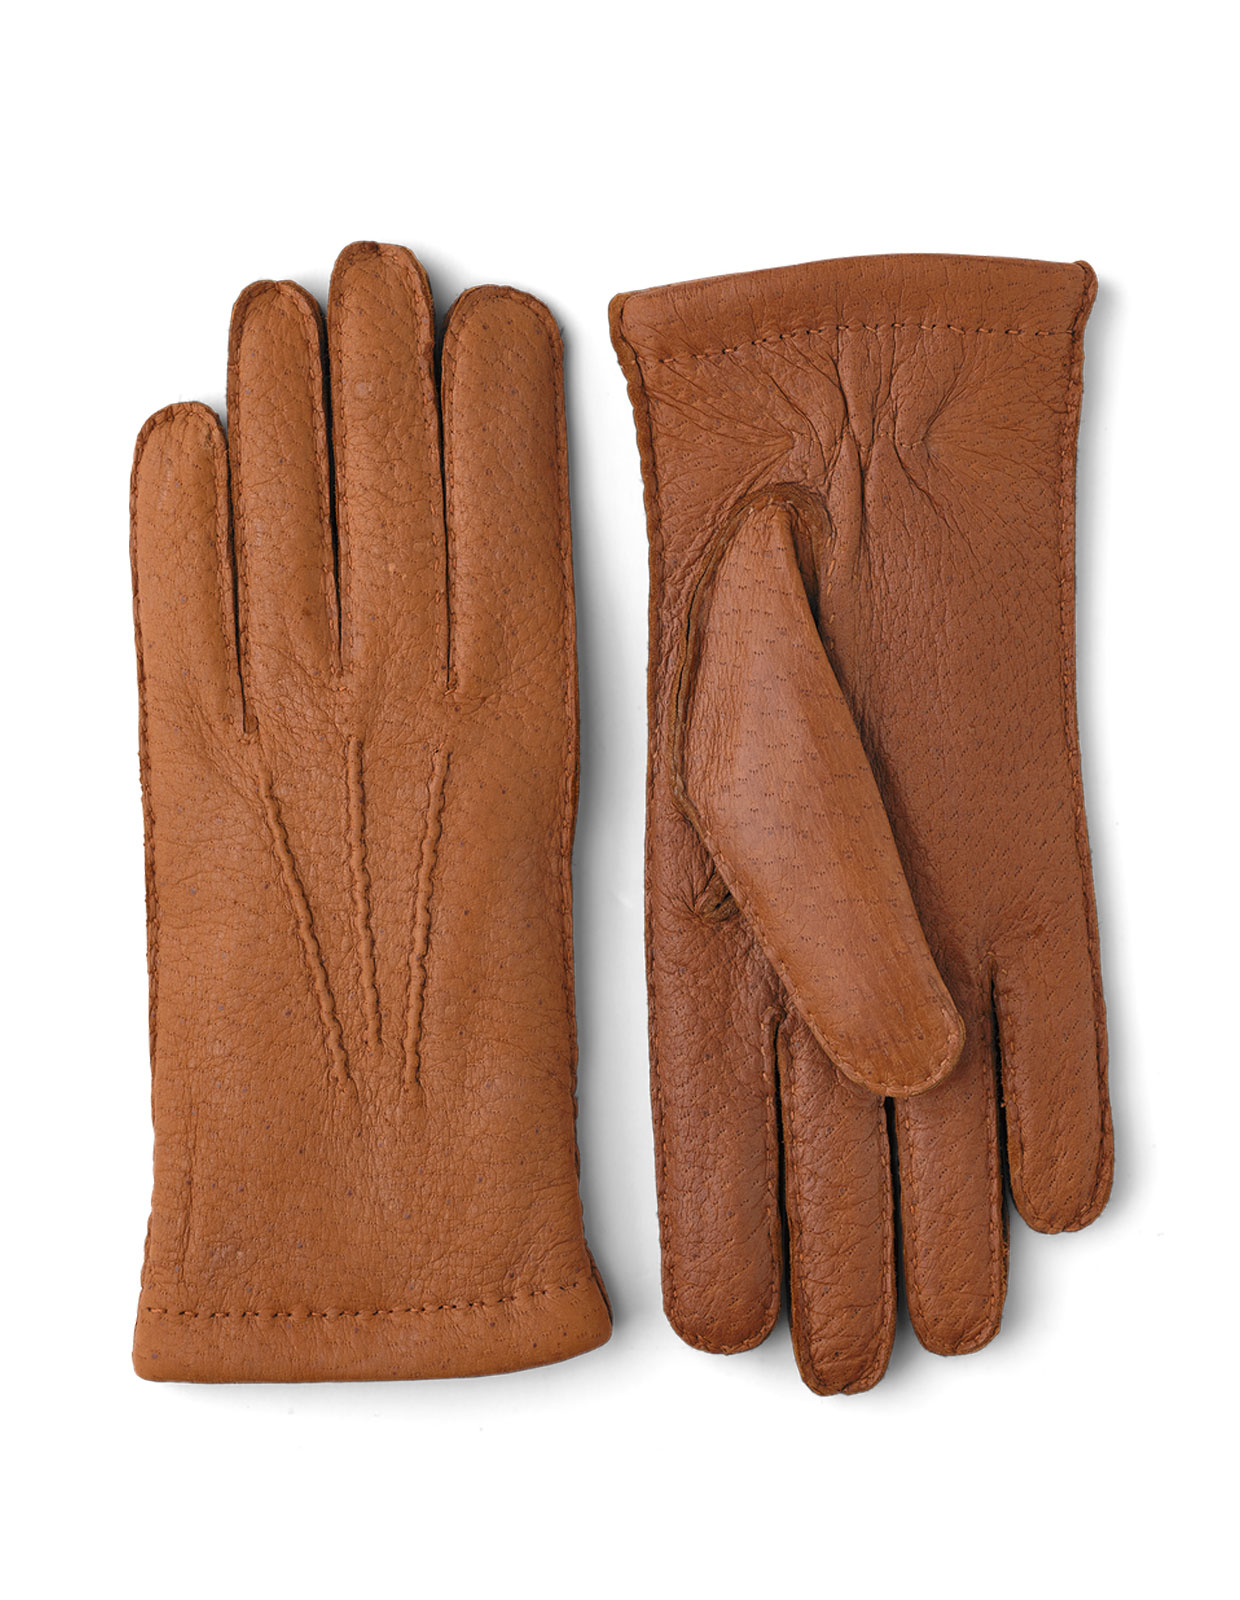 Peccary Handsewn Cashmere Lined Gloves Cork Stl 9.5